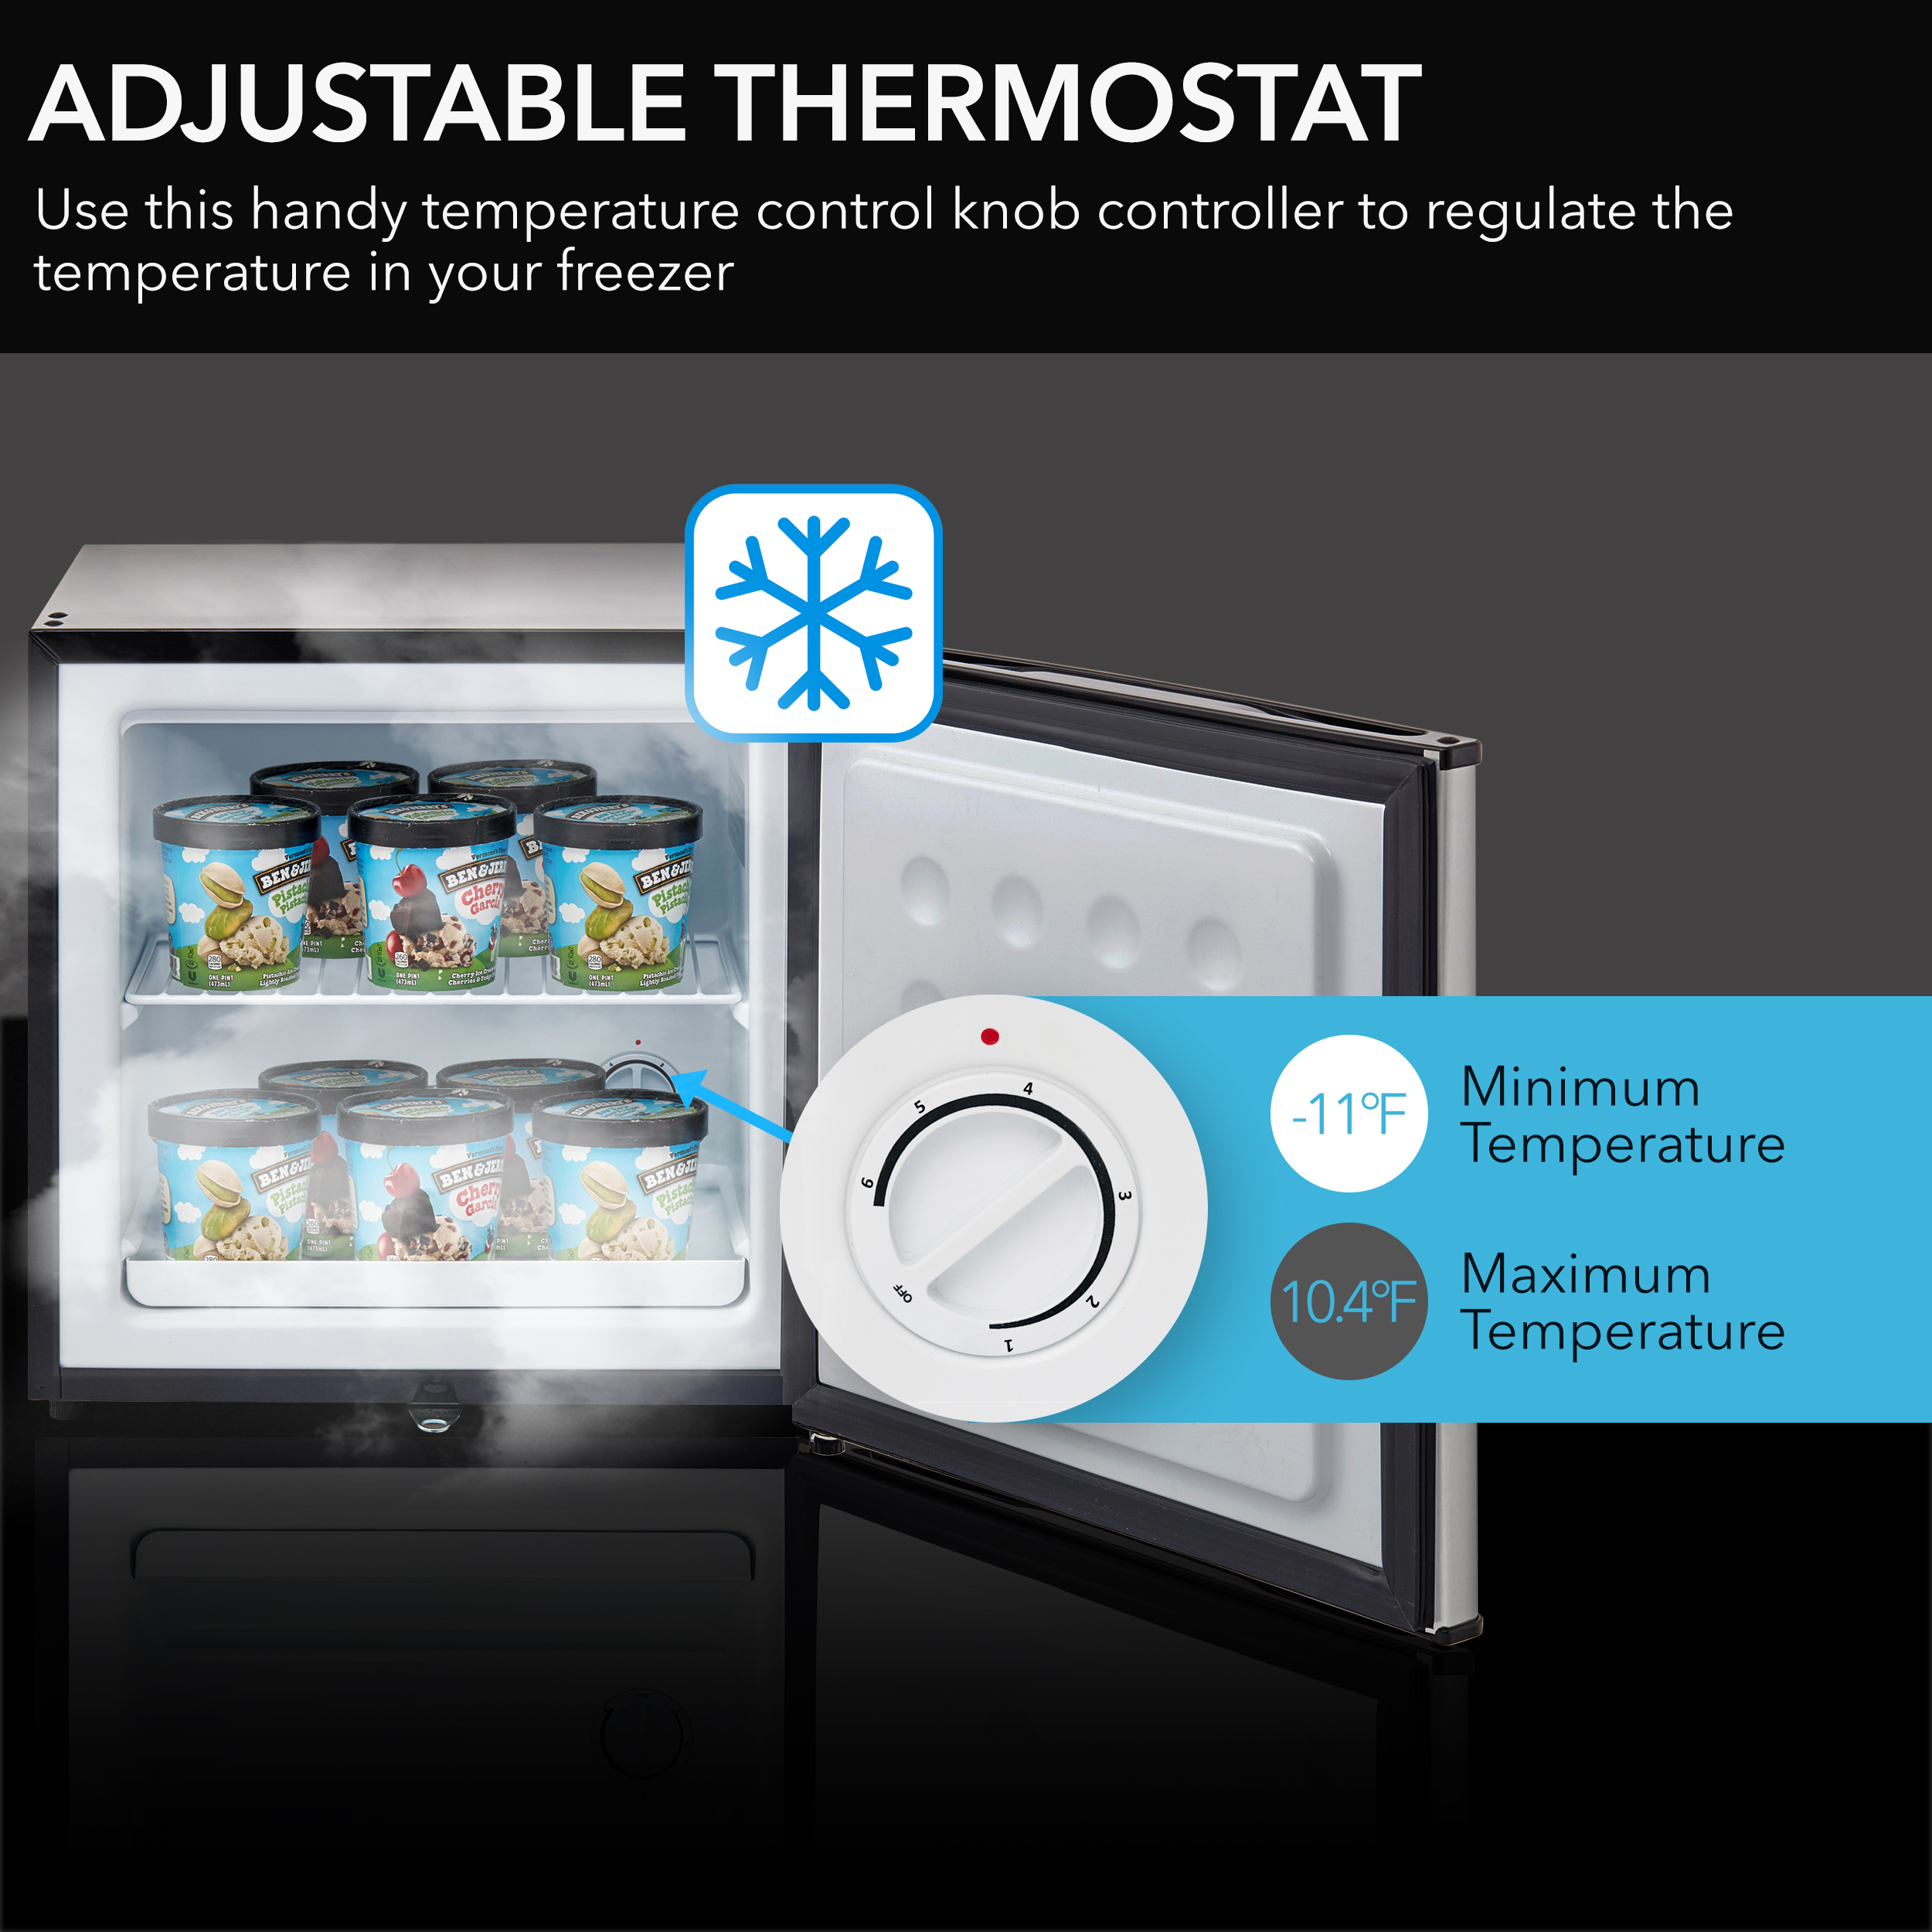 https://www.whynter.com/wp-content/uploads/CUF-112SS-ADJUSTABLE-THERMOSTAT.jpg